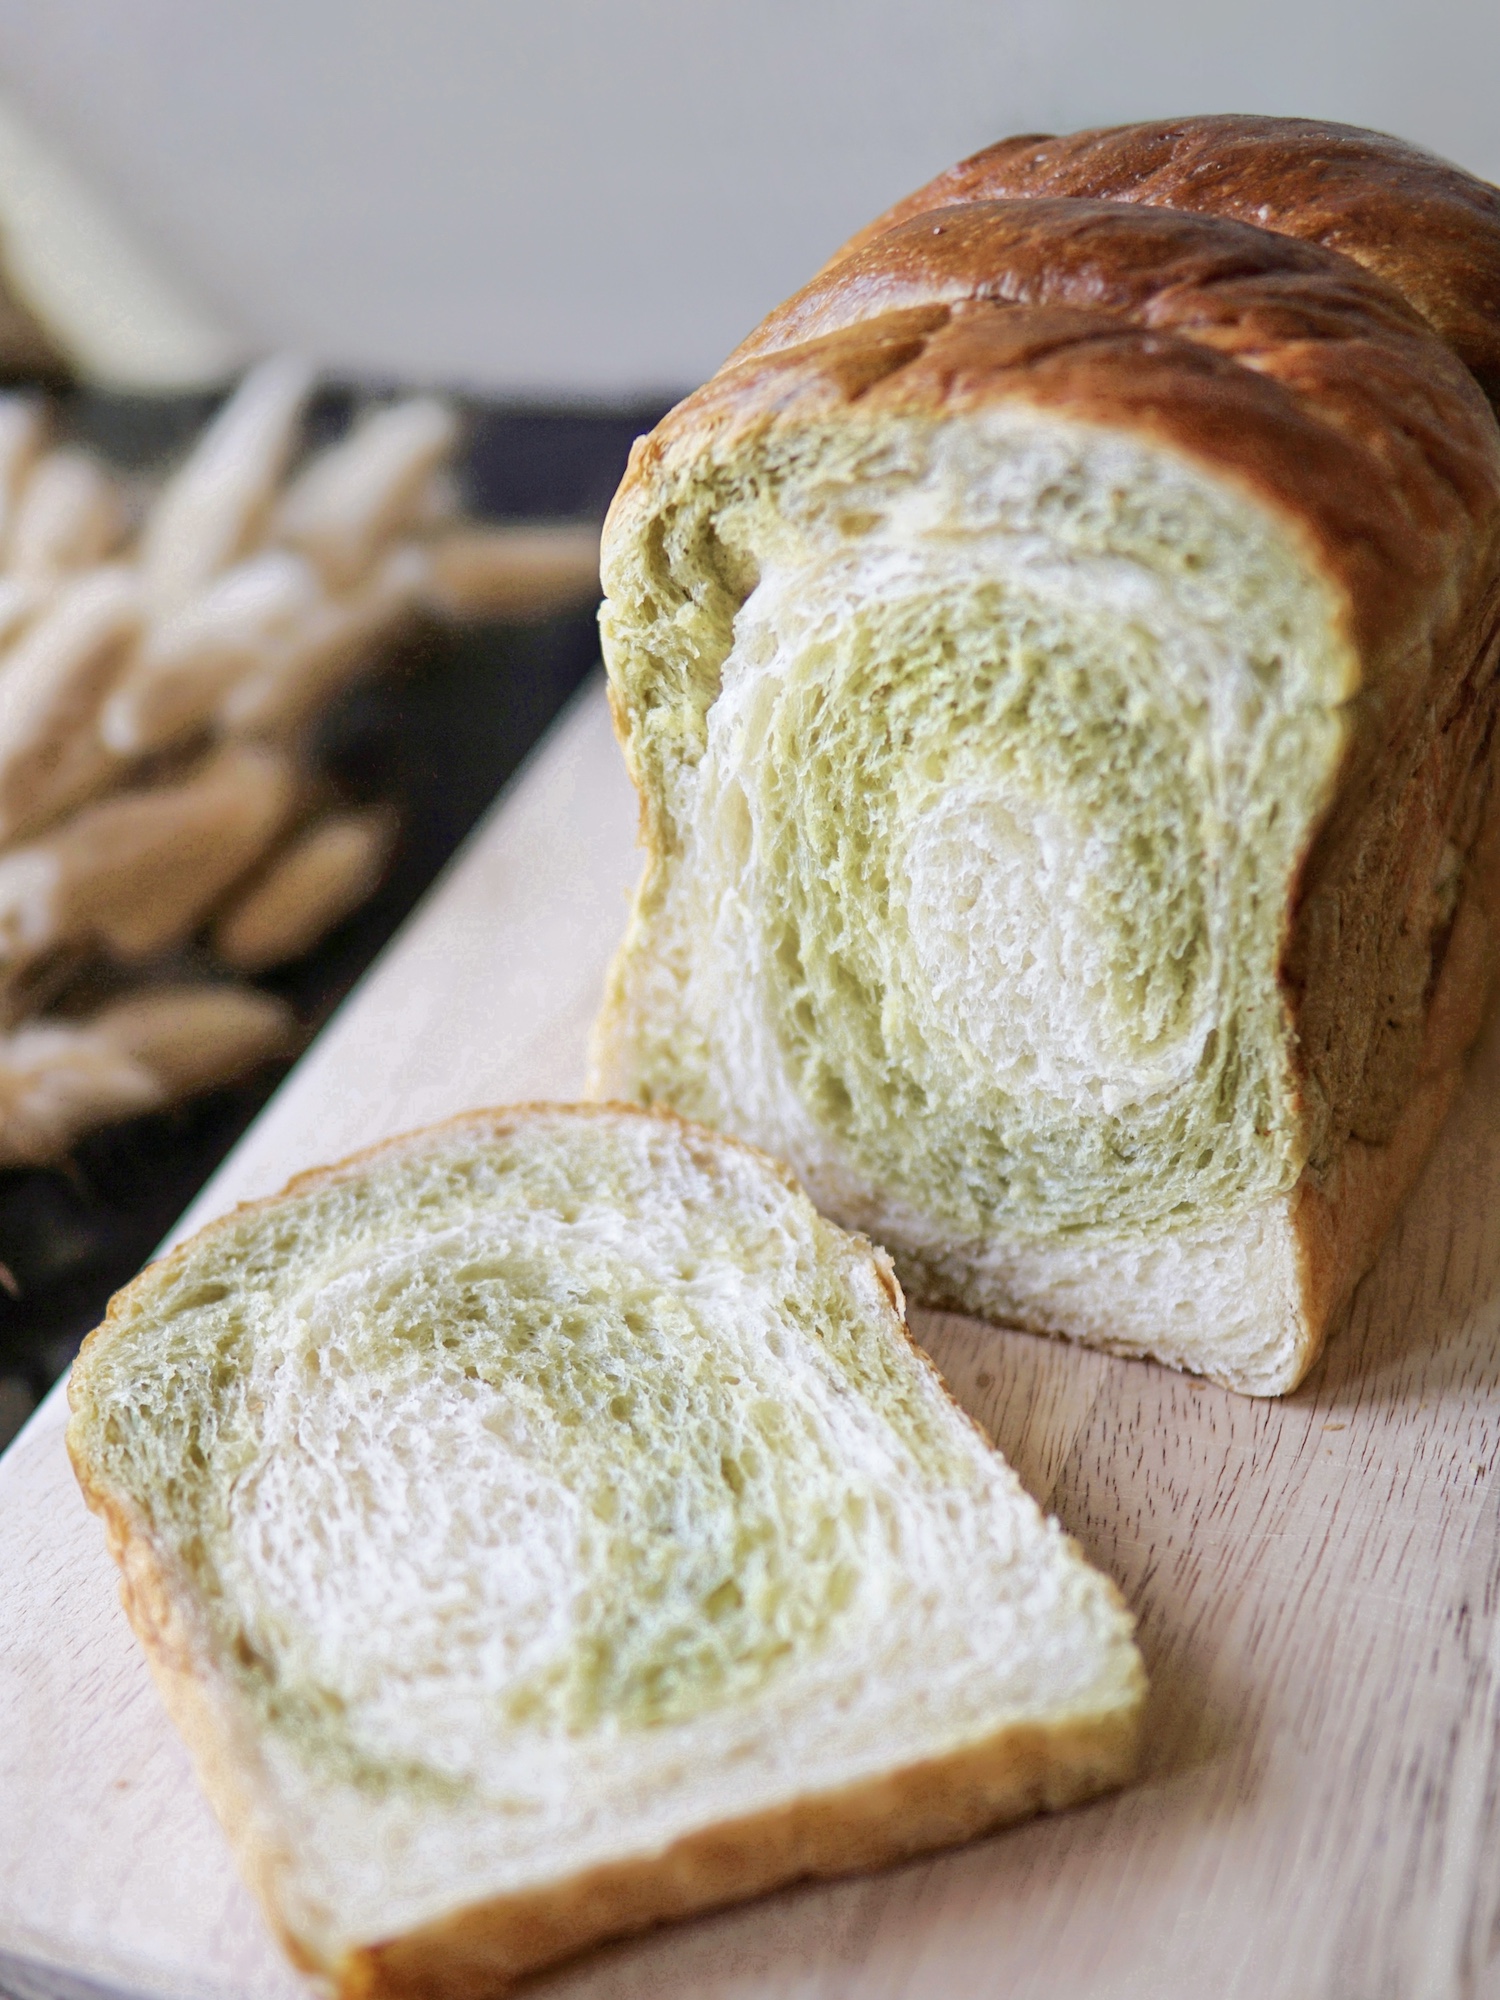 How to Bake Checkered Matcha Milk Bread - The Bakeanista